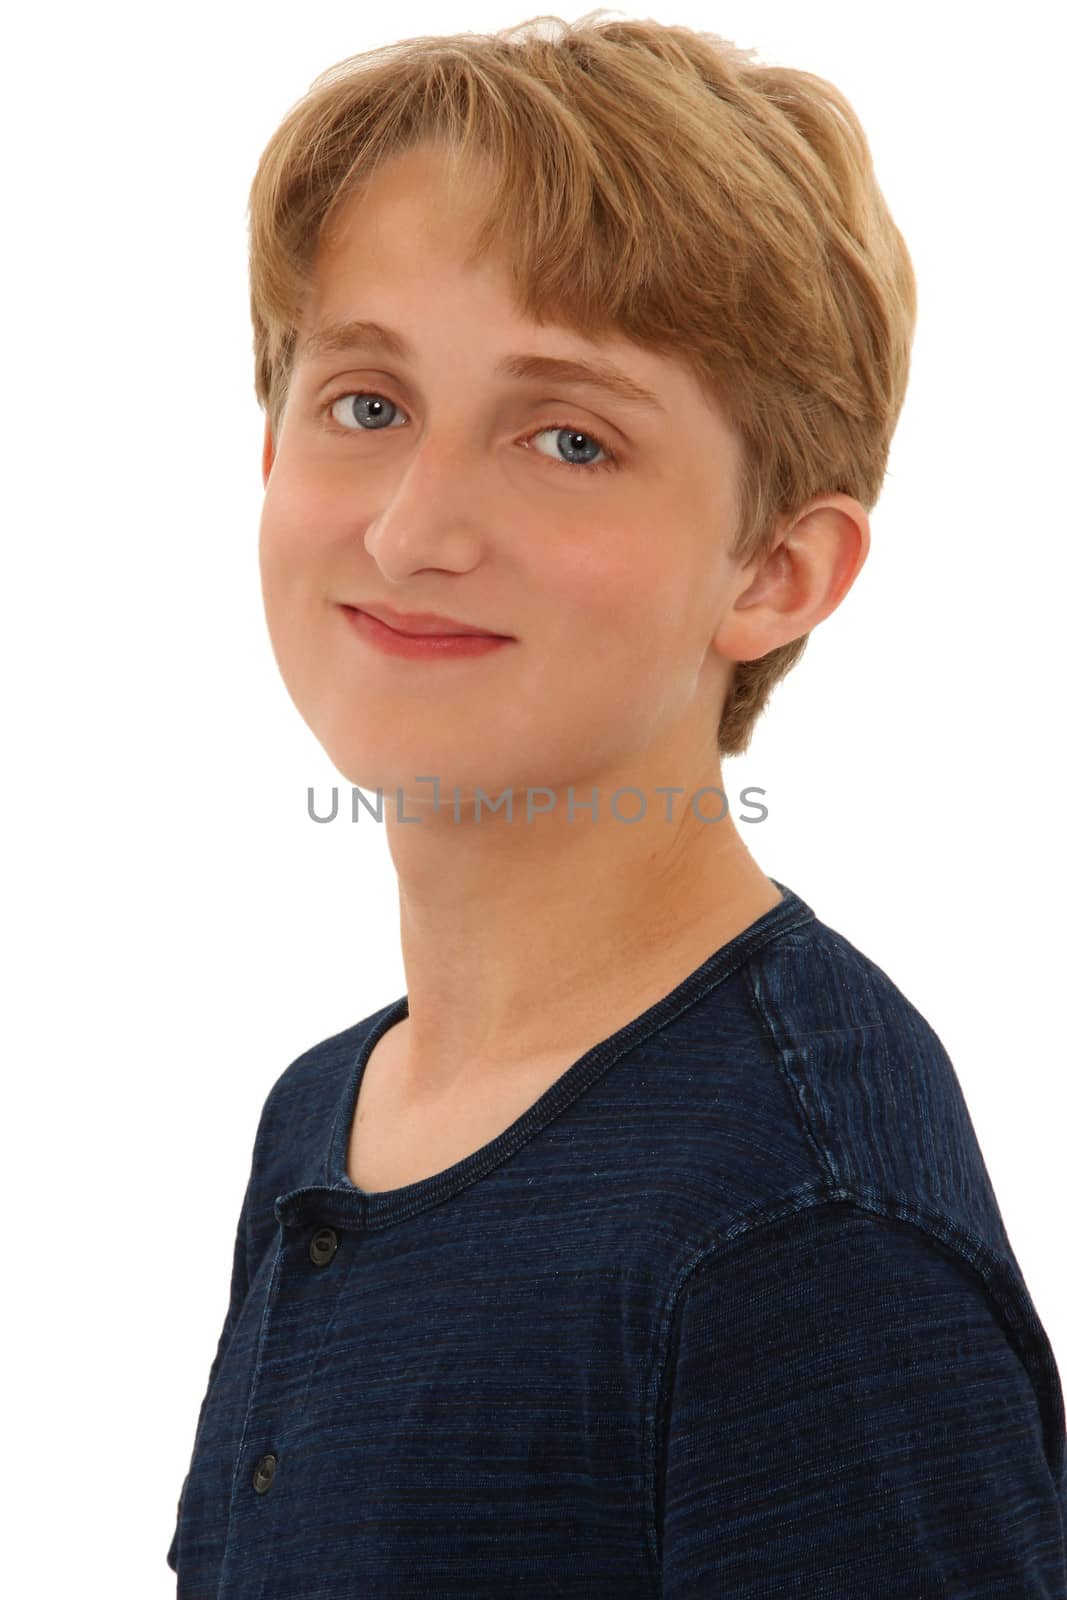 Attractive Caucasian Teen Boy Smiling over White BAckground by duplass